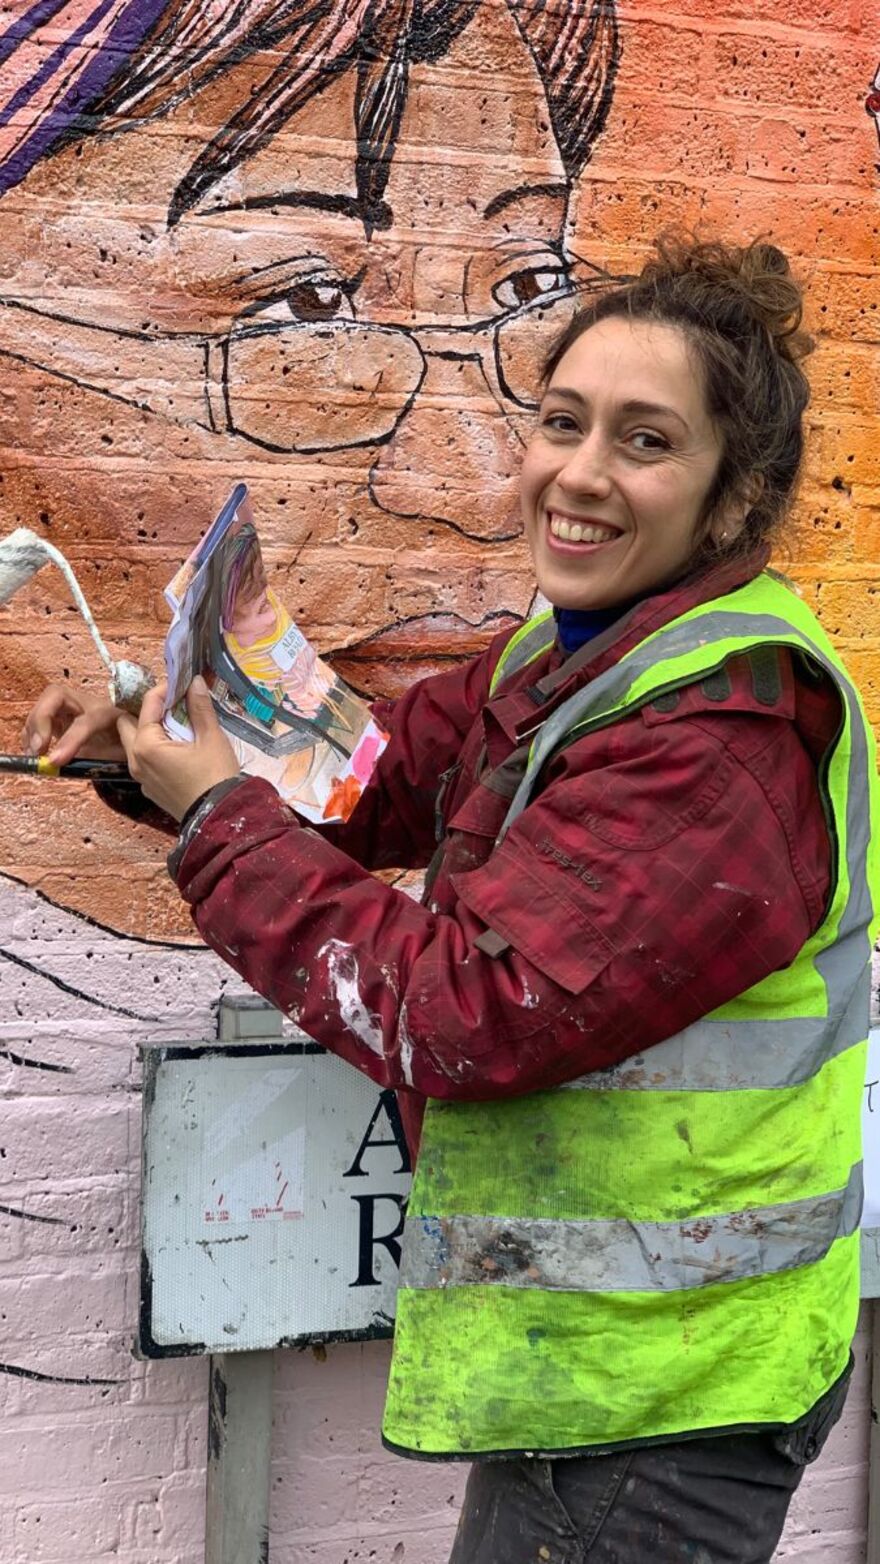 An artist in a high-vis jacket stands in front of a mural she is painting. She has a roller and a paint brush in her hands.